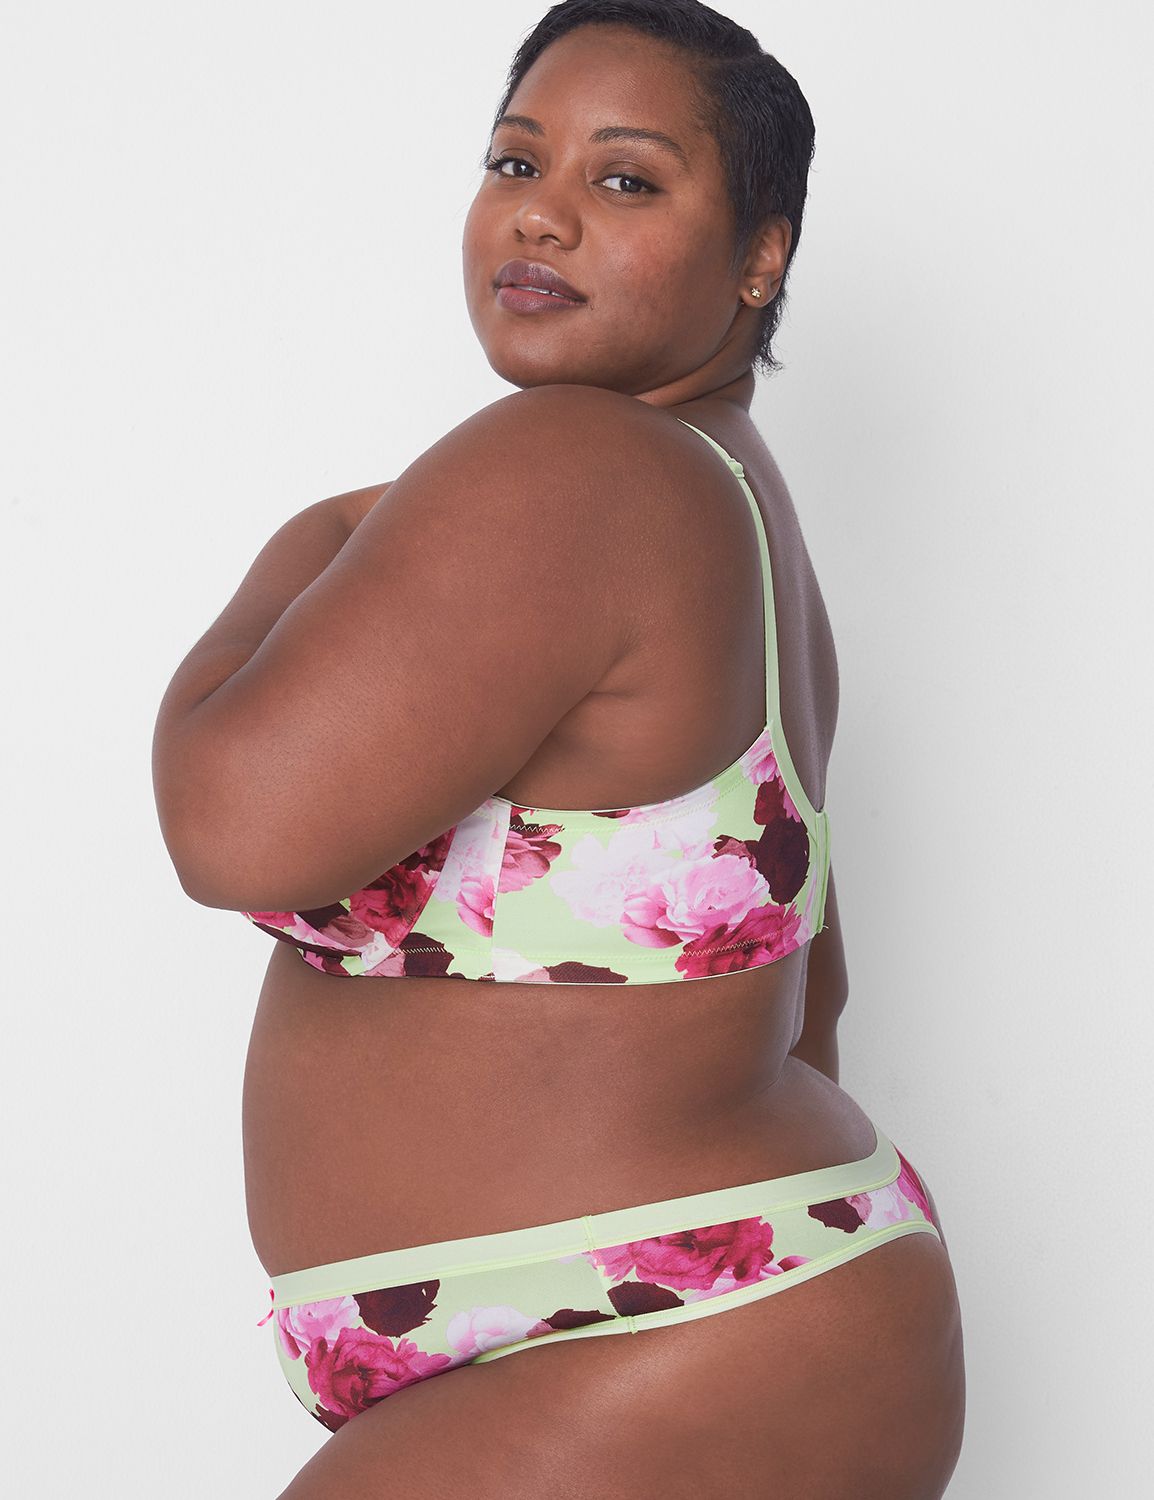 Lane Bryant - Things to be excited about: 1. It's Saturday. 2. The  Semi-Annual Sale is on. 3. You can search bras by size online now!